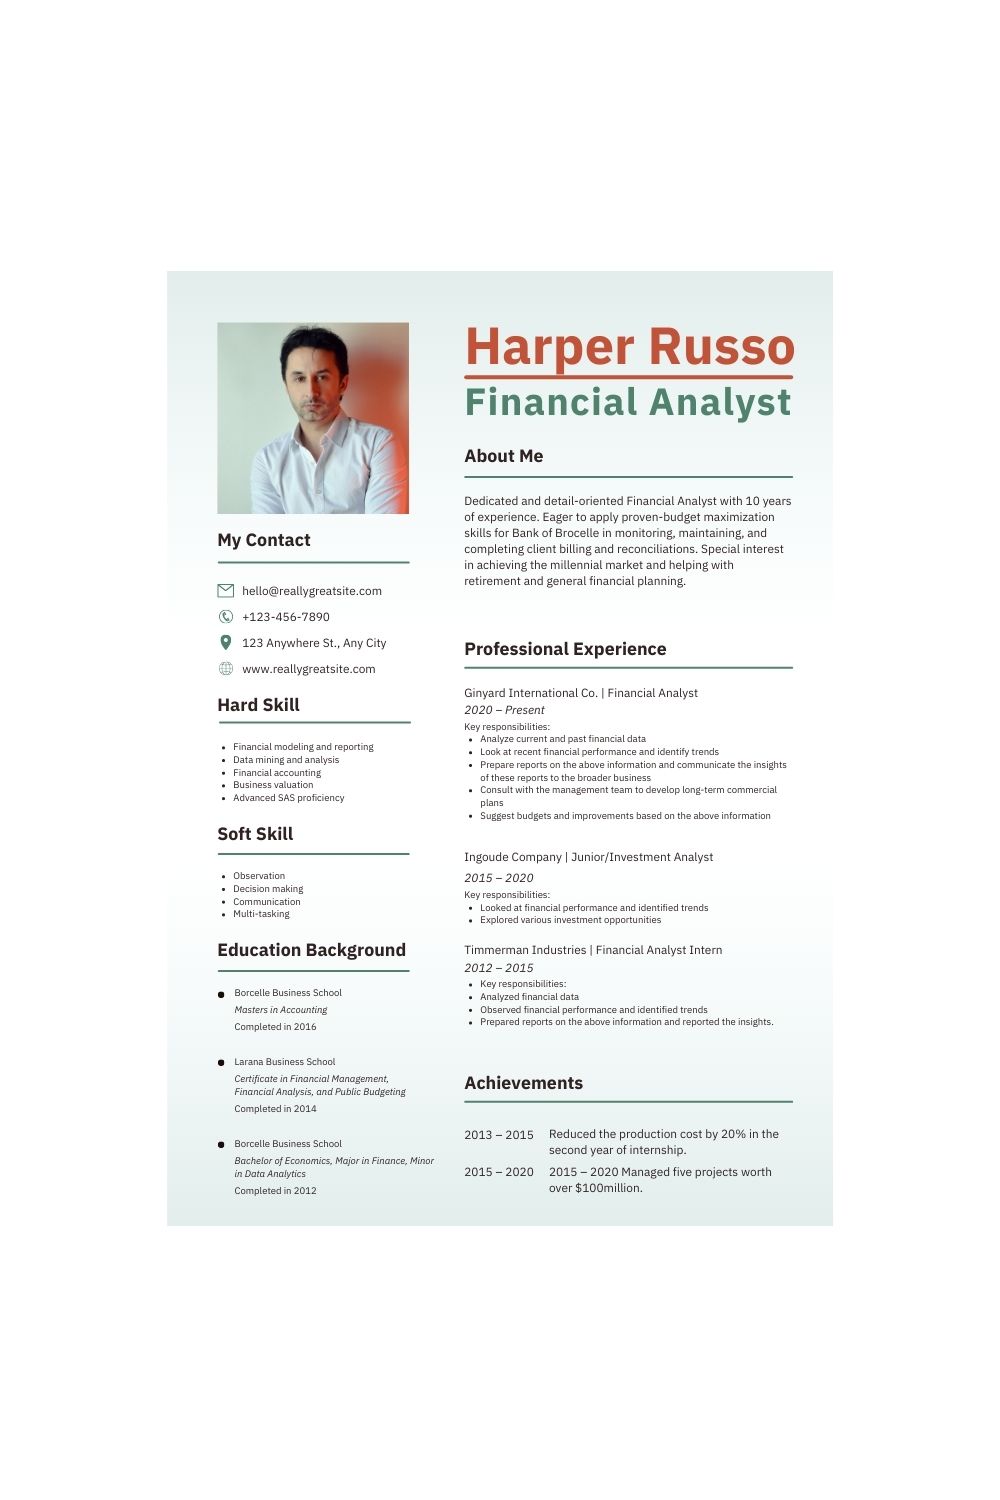 Professional resume for a finance firm.